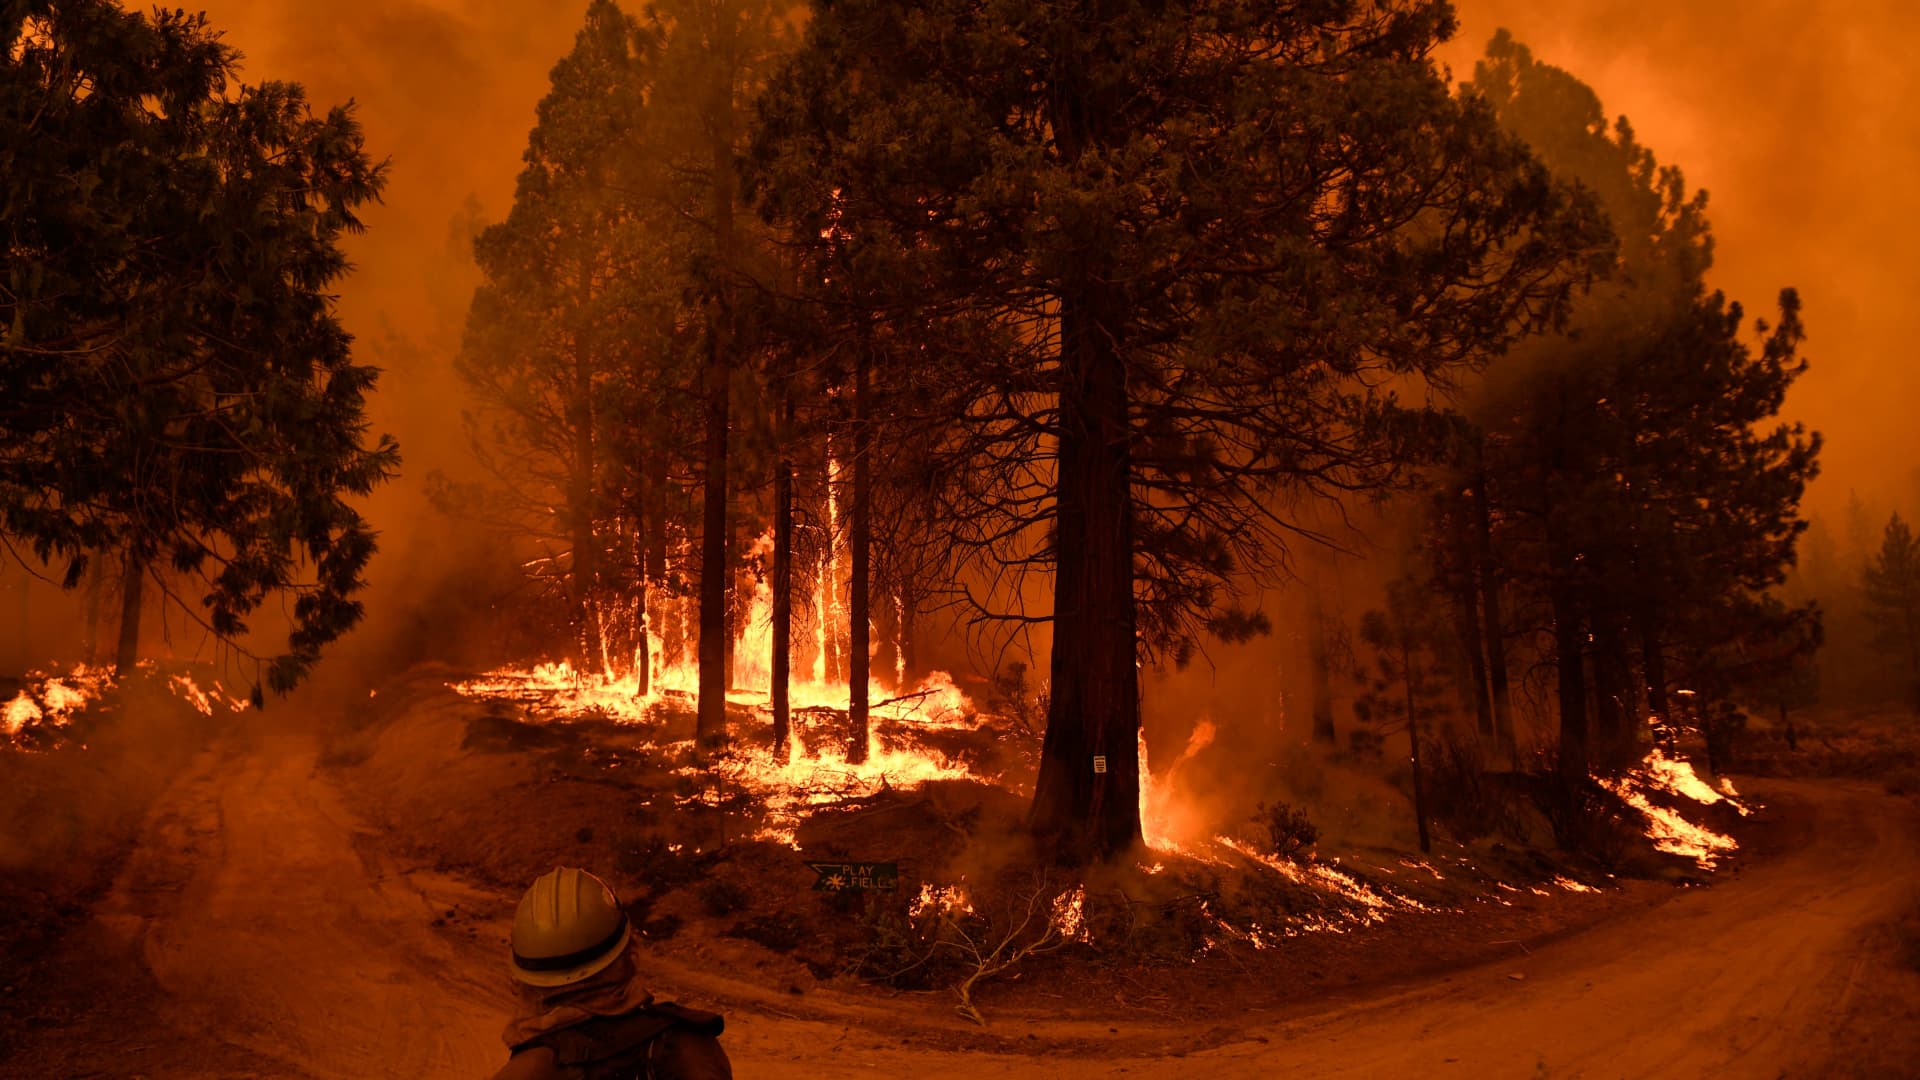 A firefighter watches flame and smoke rise into the air as trees burn during the Windy Fire in the Sequoia National Forest near Johnsondale, California, on Sept. 22, 2021.